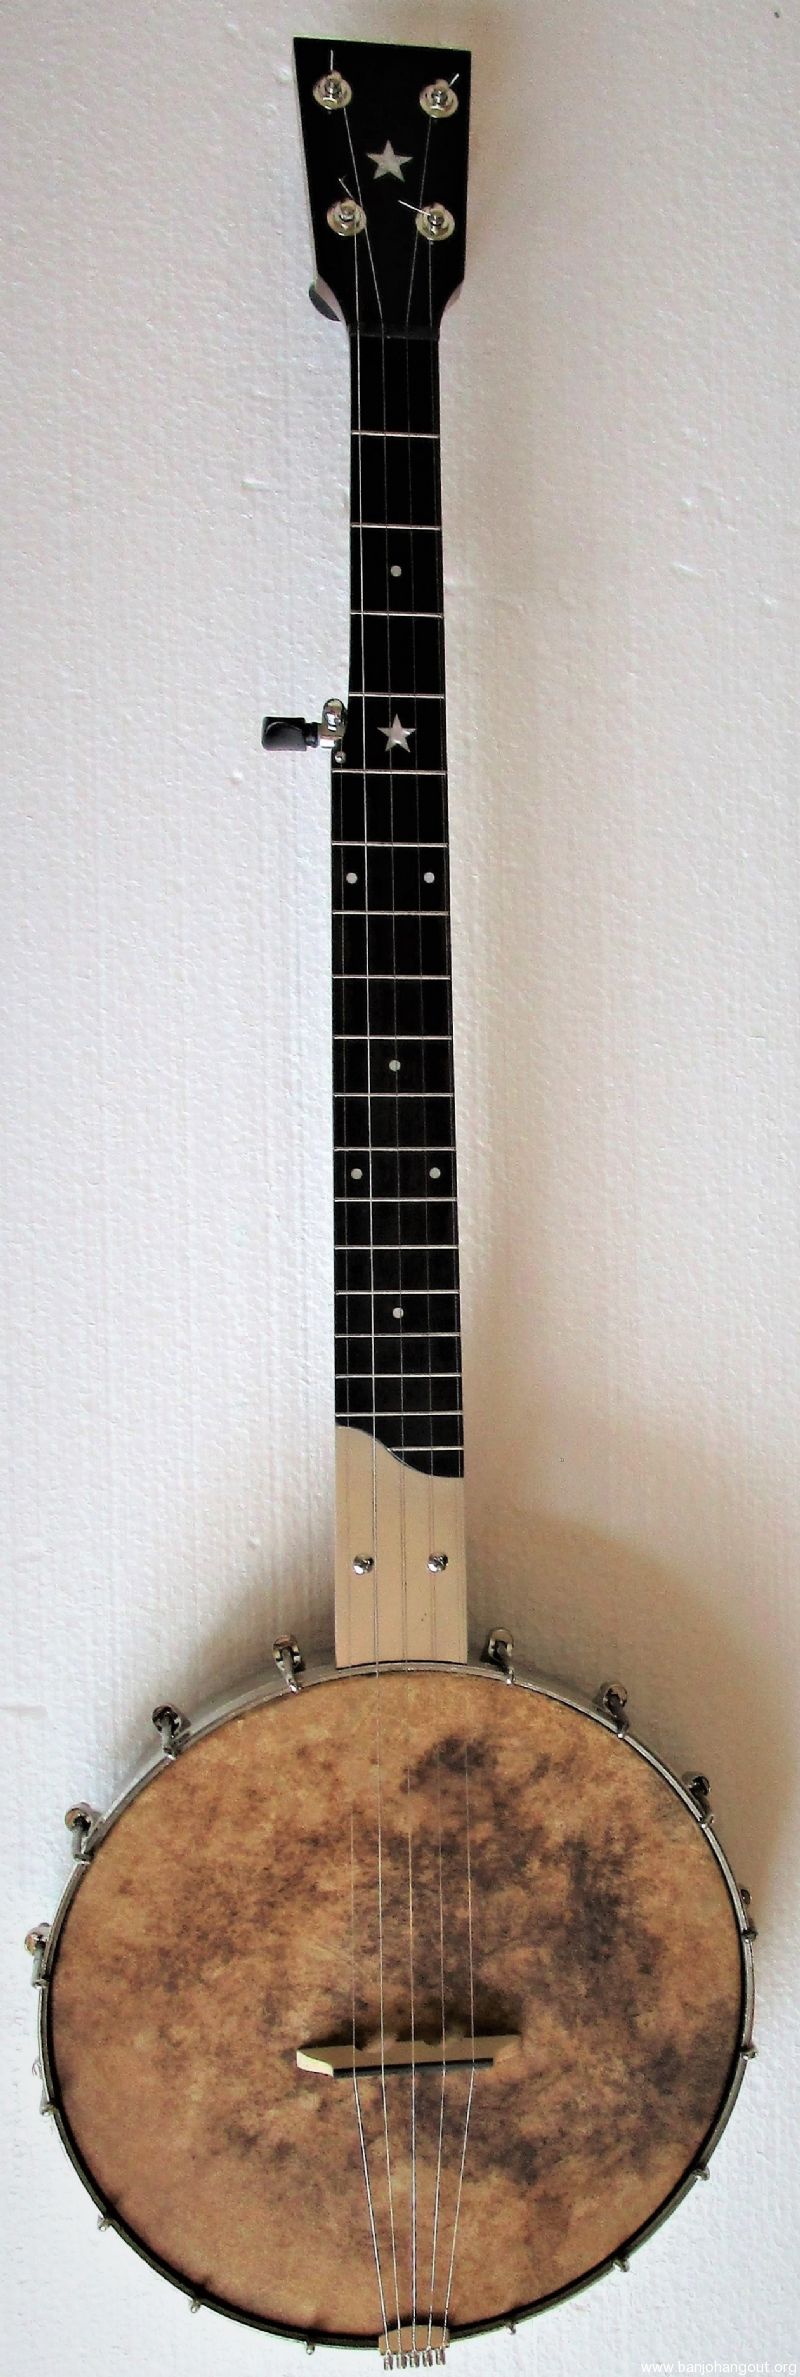 Old Time Openback Clawhammer Style Banjo. - Used Banjo For Sale at